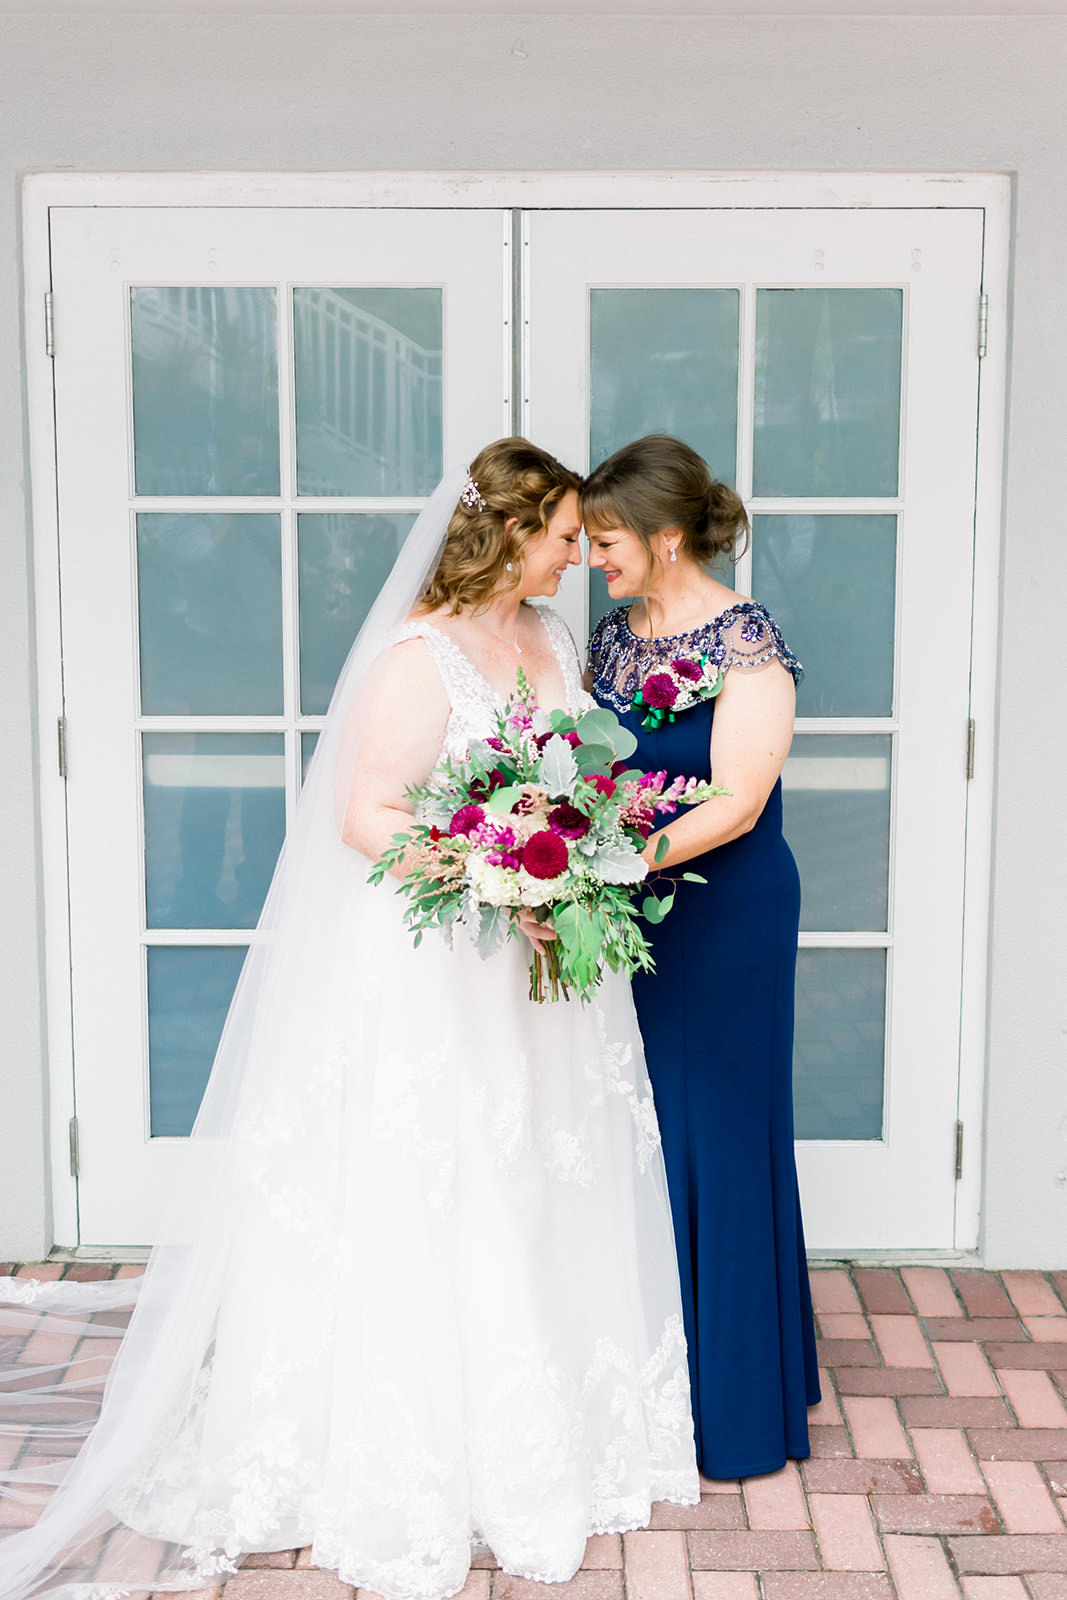 Beautiful Bride Holding Garden Greenery with Pink, Red and Purple Floral Bouquet and Mother Wedding Portrait | Navy Blue Mother of the Bride Dress | Tampa Bay Wedding Photographer Shauna and Jordon Photography